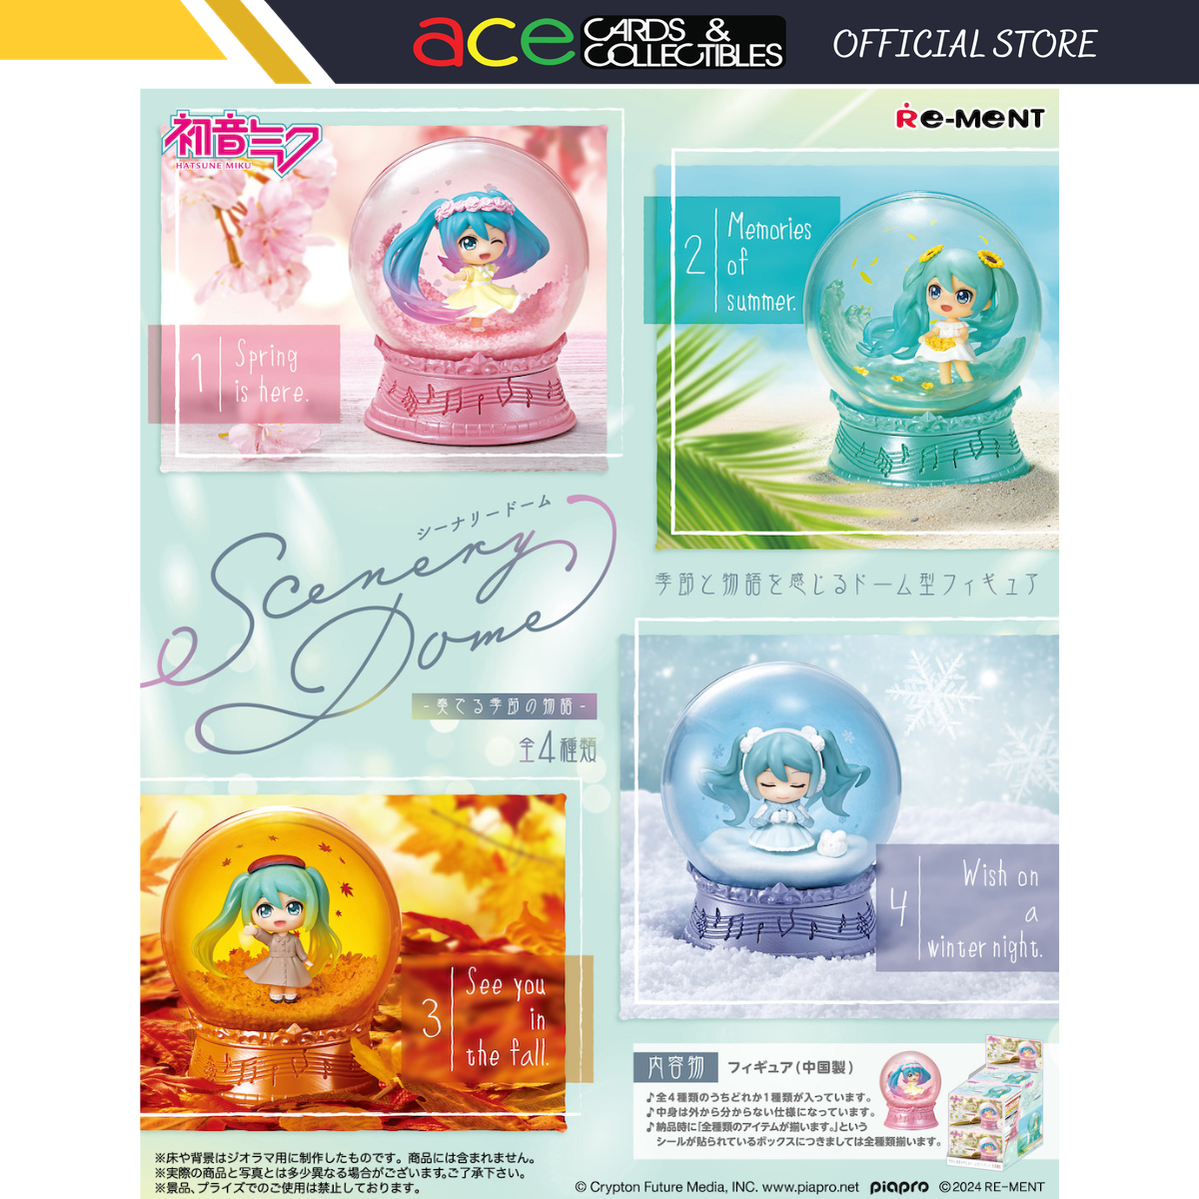 Re-Ment Hatsune Miku Scenery Dome-Single Box-Re-Ment-Ace Cards & Collectibles